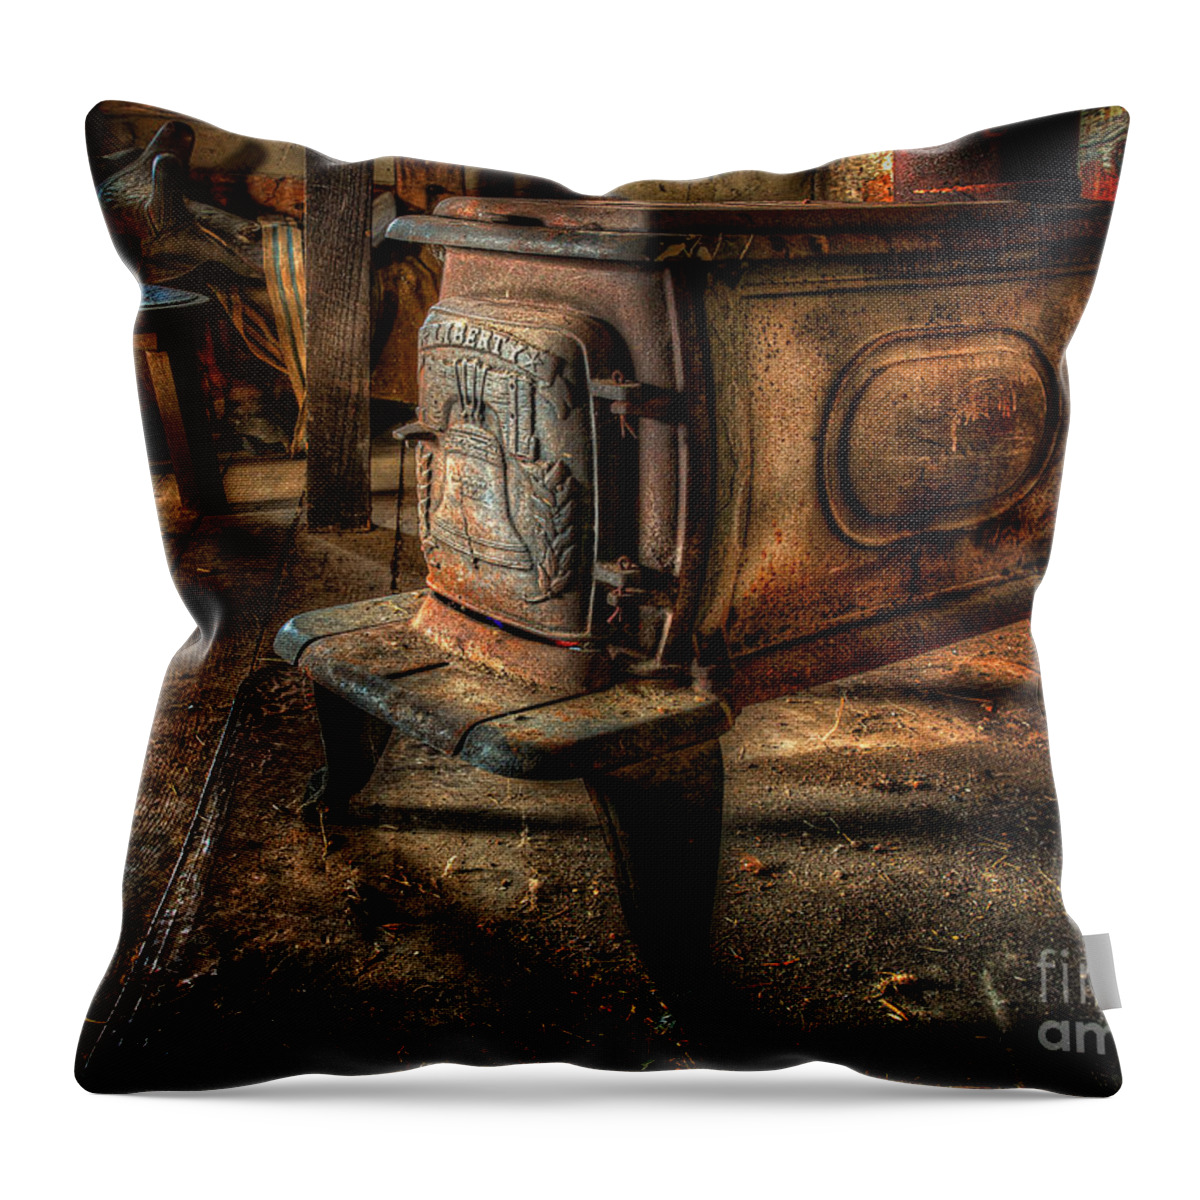 Stove Throw Pillow featuring the photograph Liberty Wood Stove by Lois Bryan